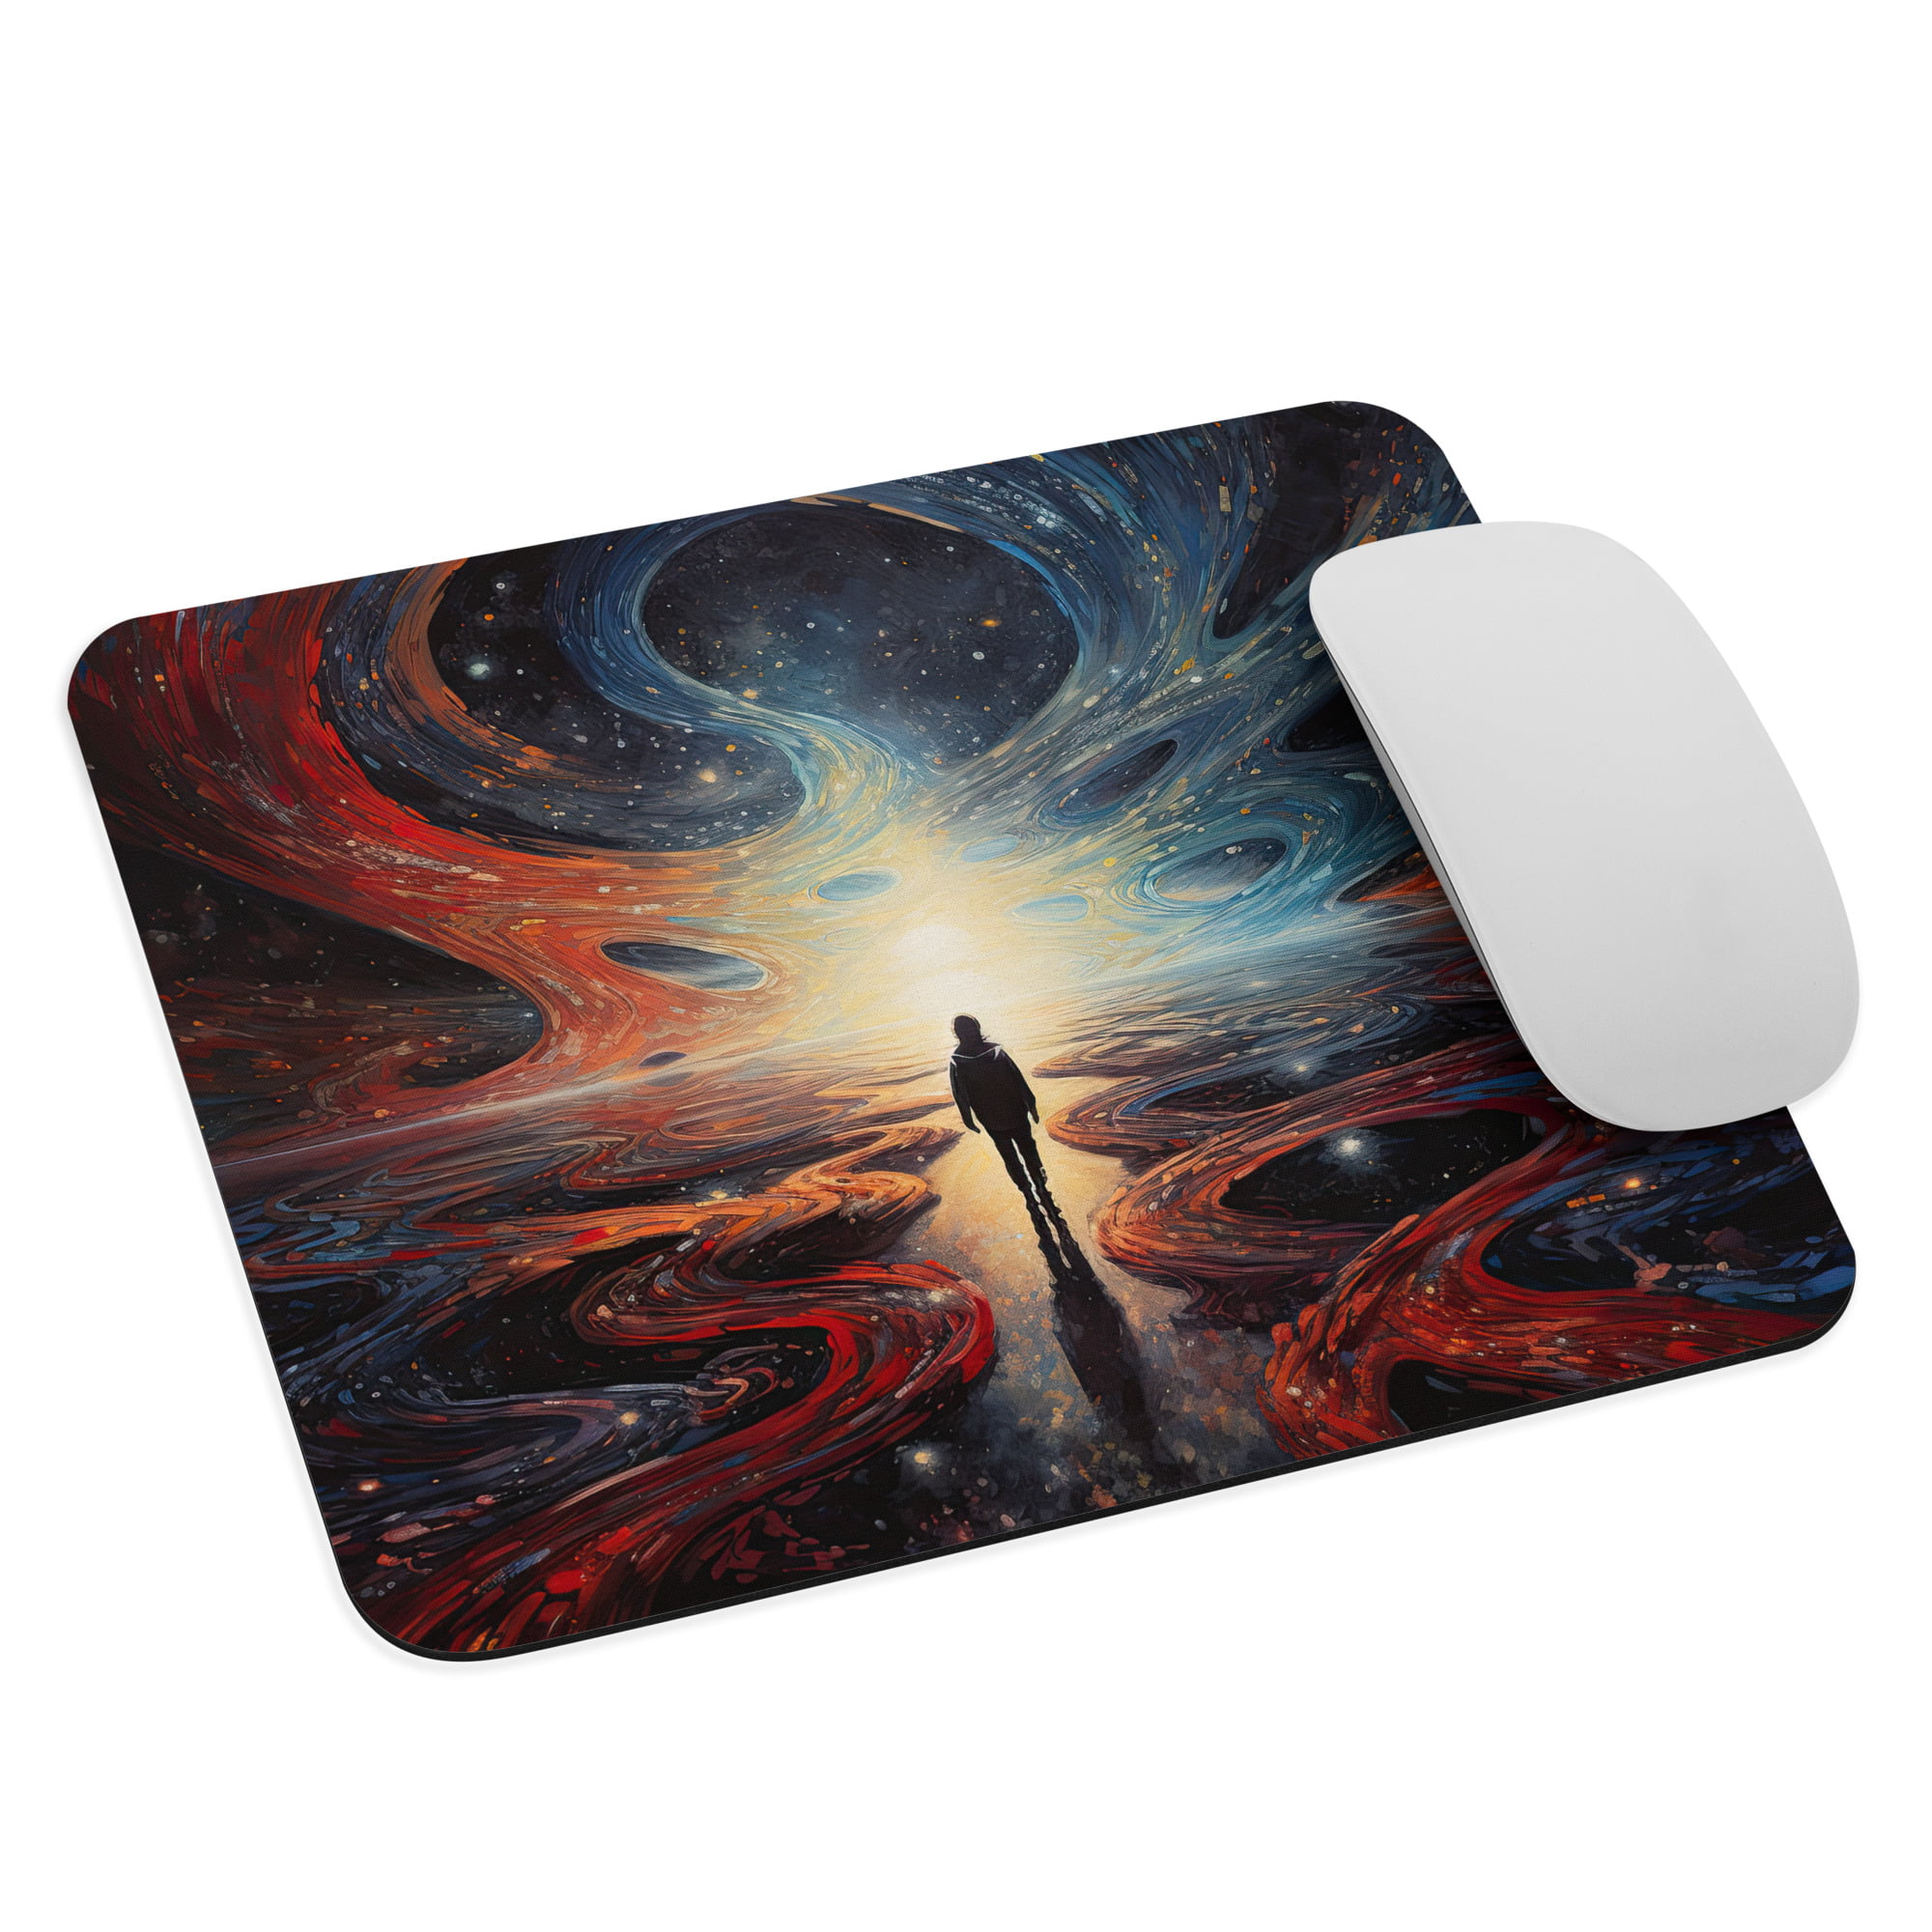 Infinity Abstract Art Mouse pad